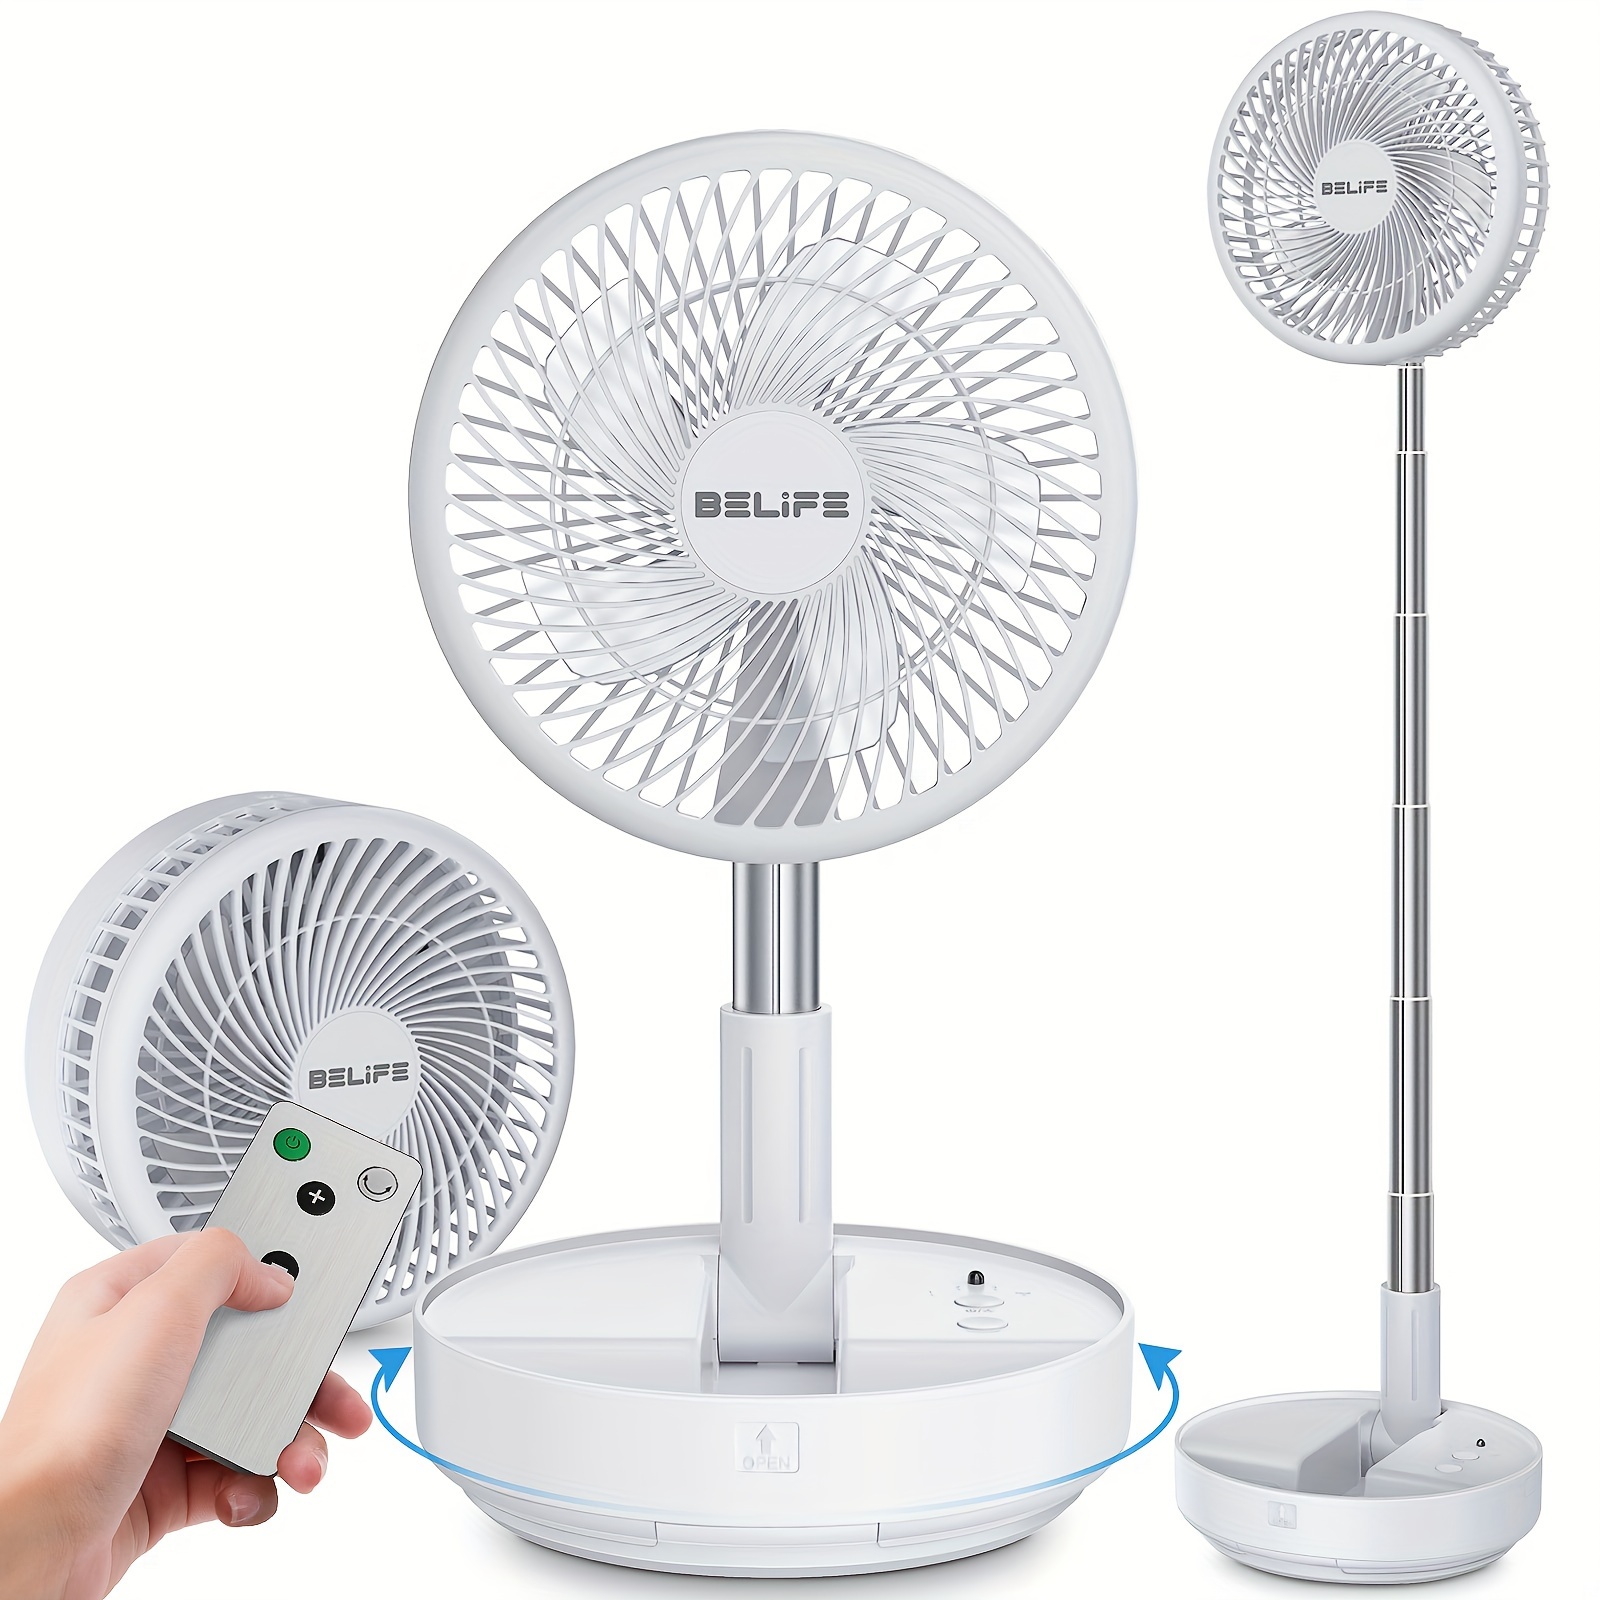 

Belife X8 Portable Fan, 7.7inch Oscillating Cordless Foldable Fan With Remote, 7200mah Rechargeable Battery Powerd Camping Fan For Travel Home Bedroom